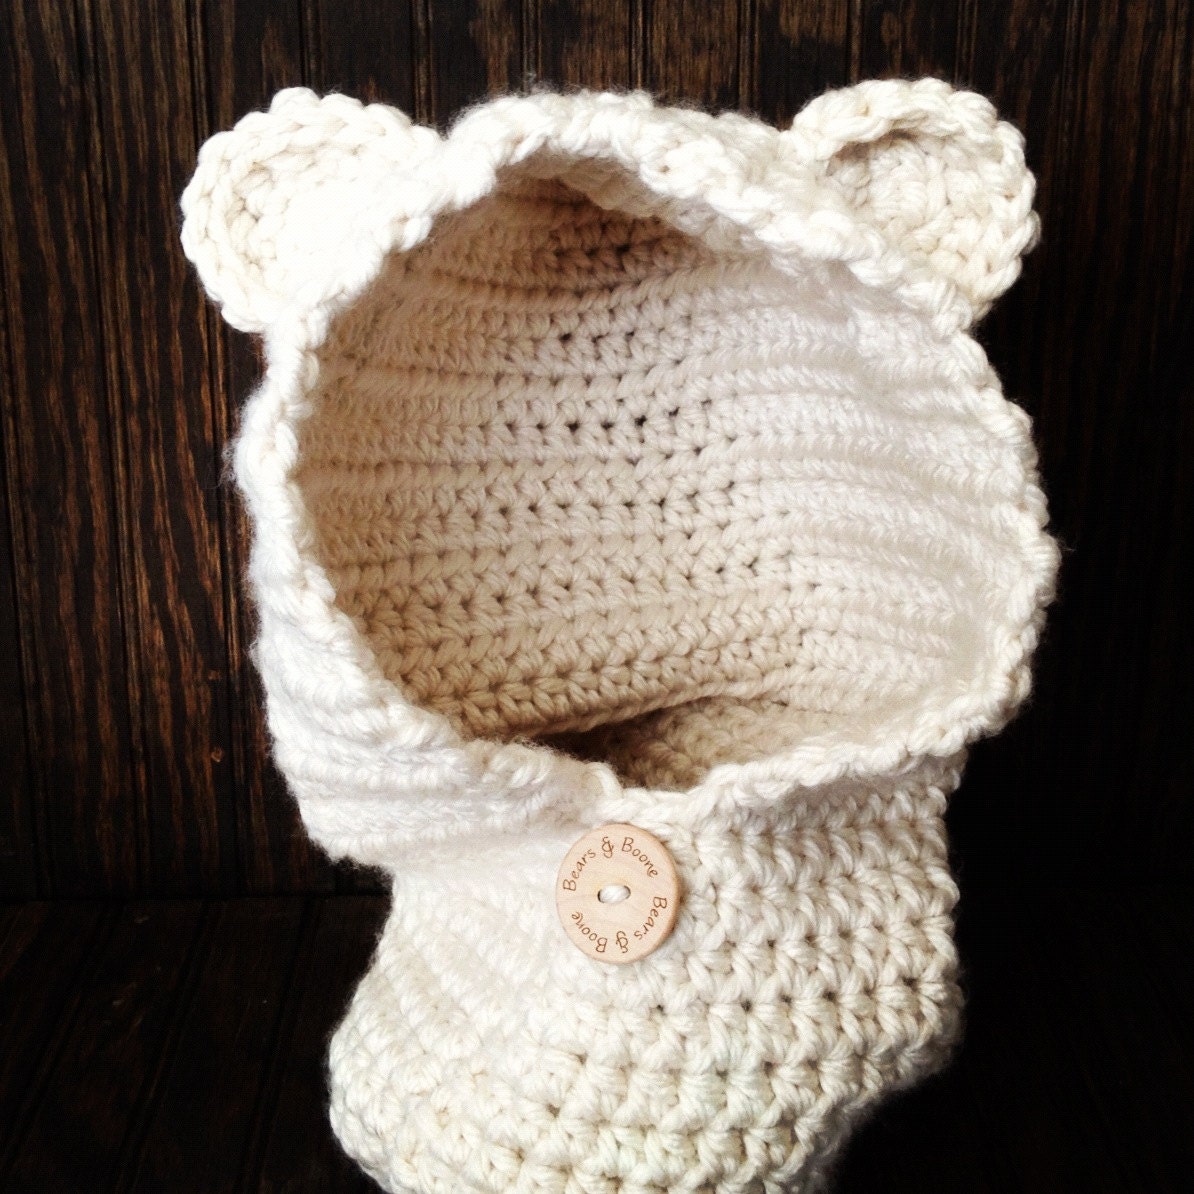 Child's hooded Hooded Hoded pattern scarf Bear child's Hooded Scarf  Adult Hooded Cowl, Cowl, Cowl,